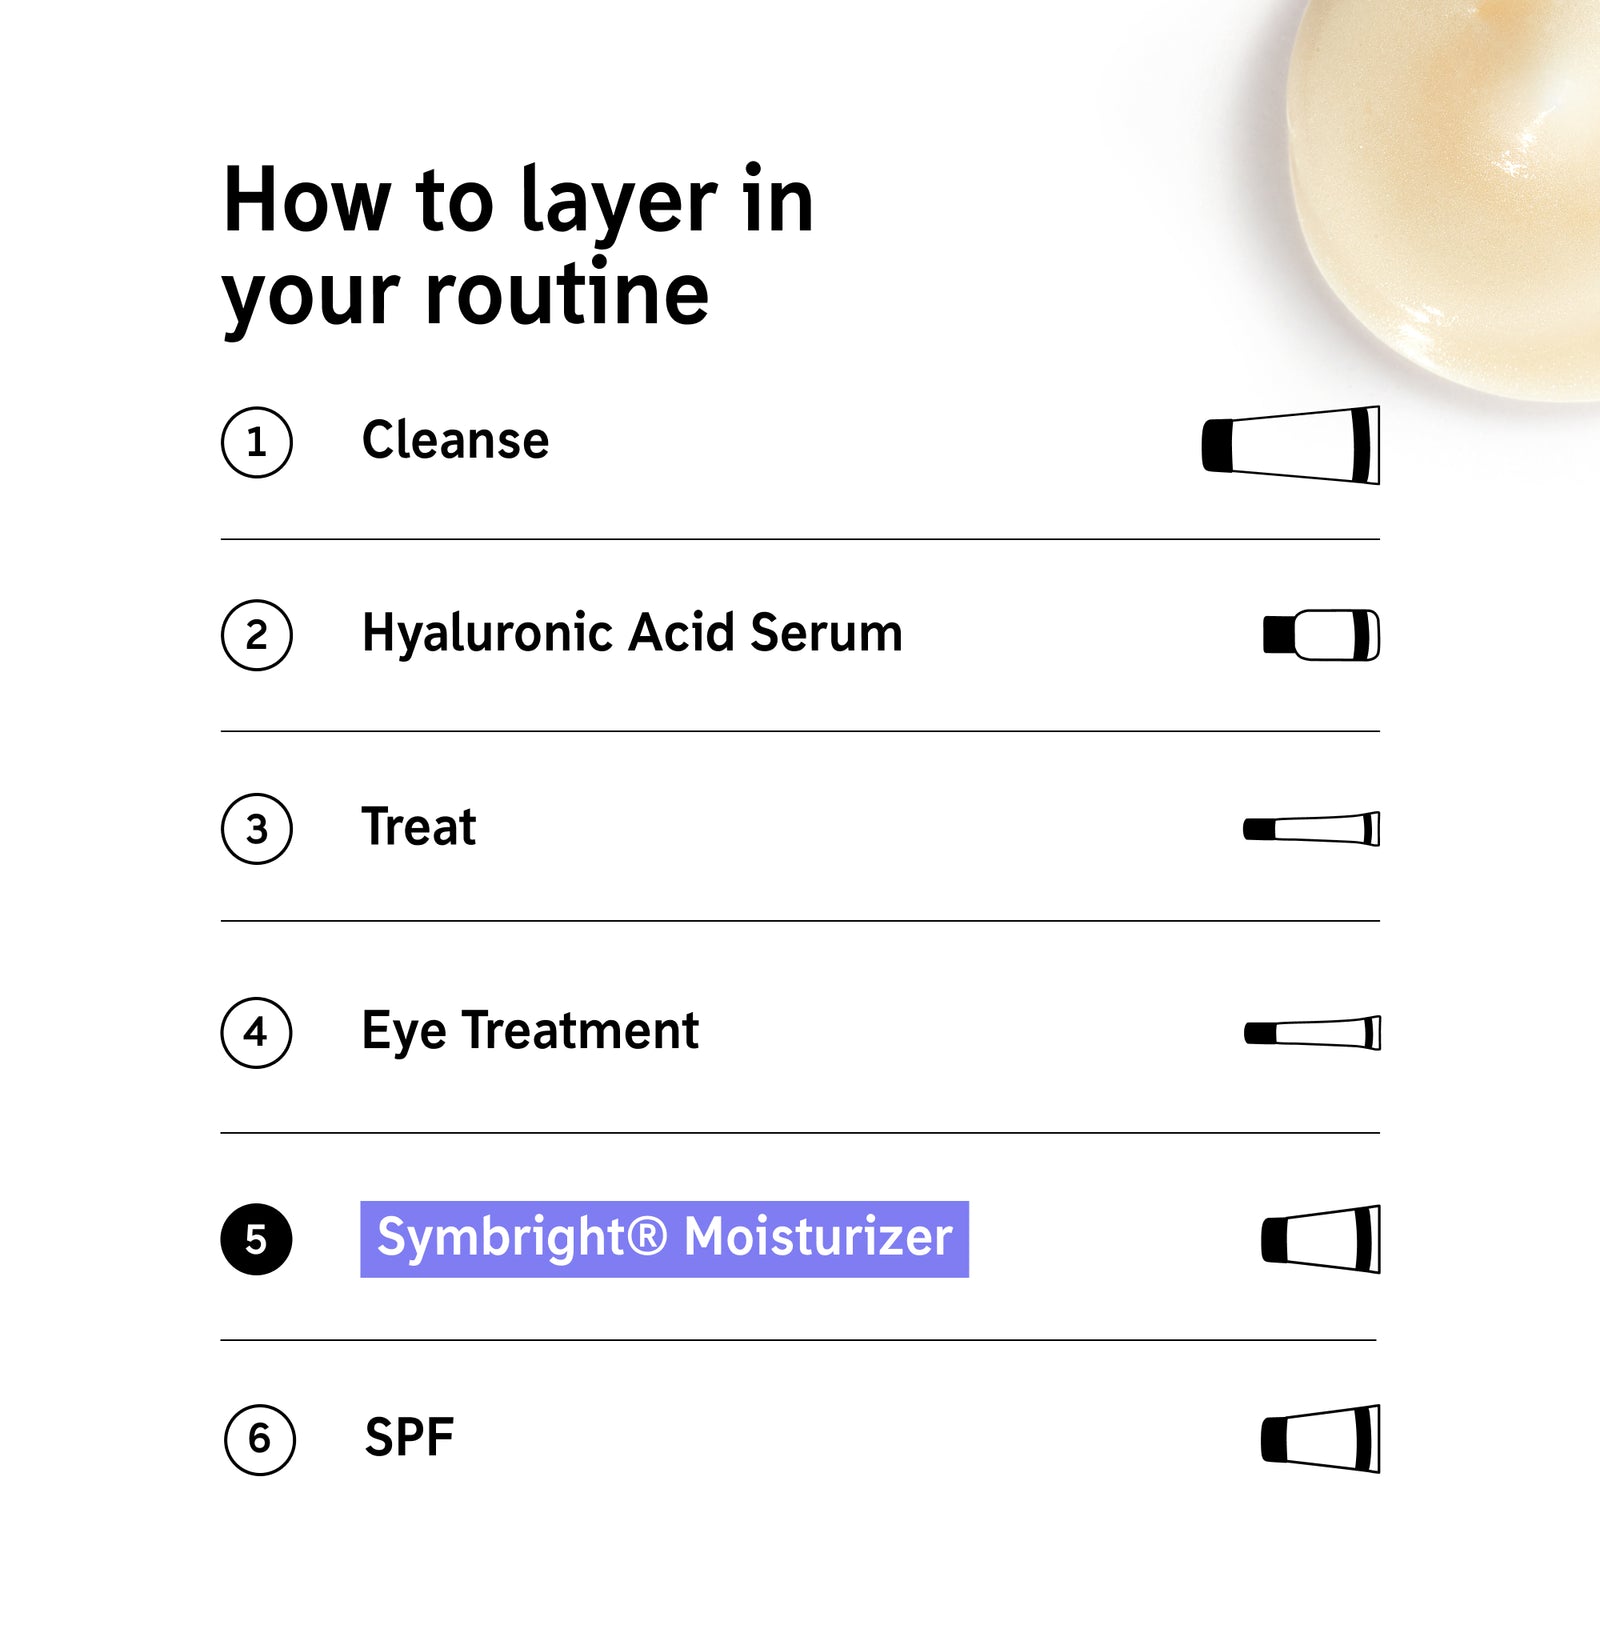 How to layer Symbright Moisturizer in your routine